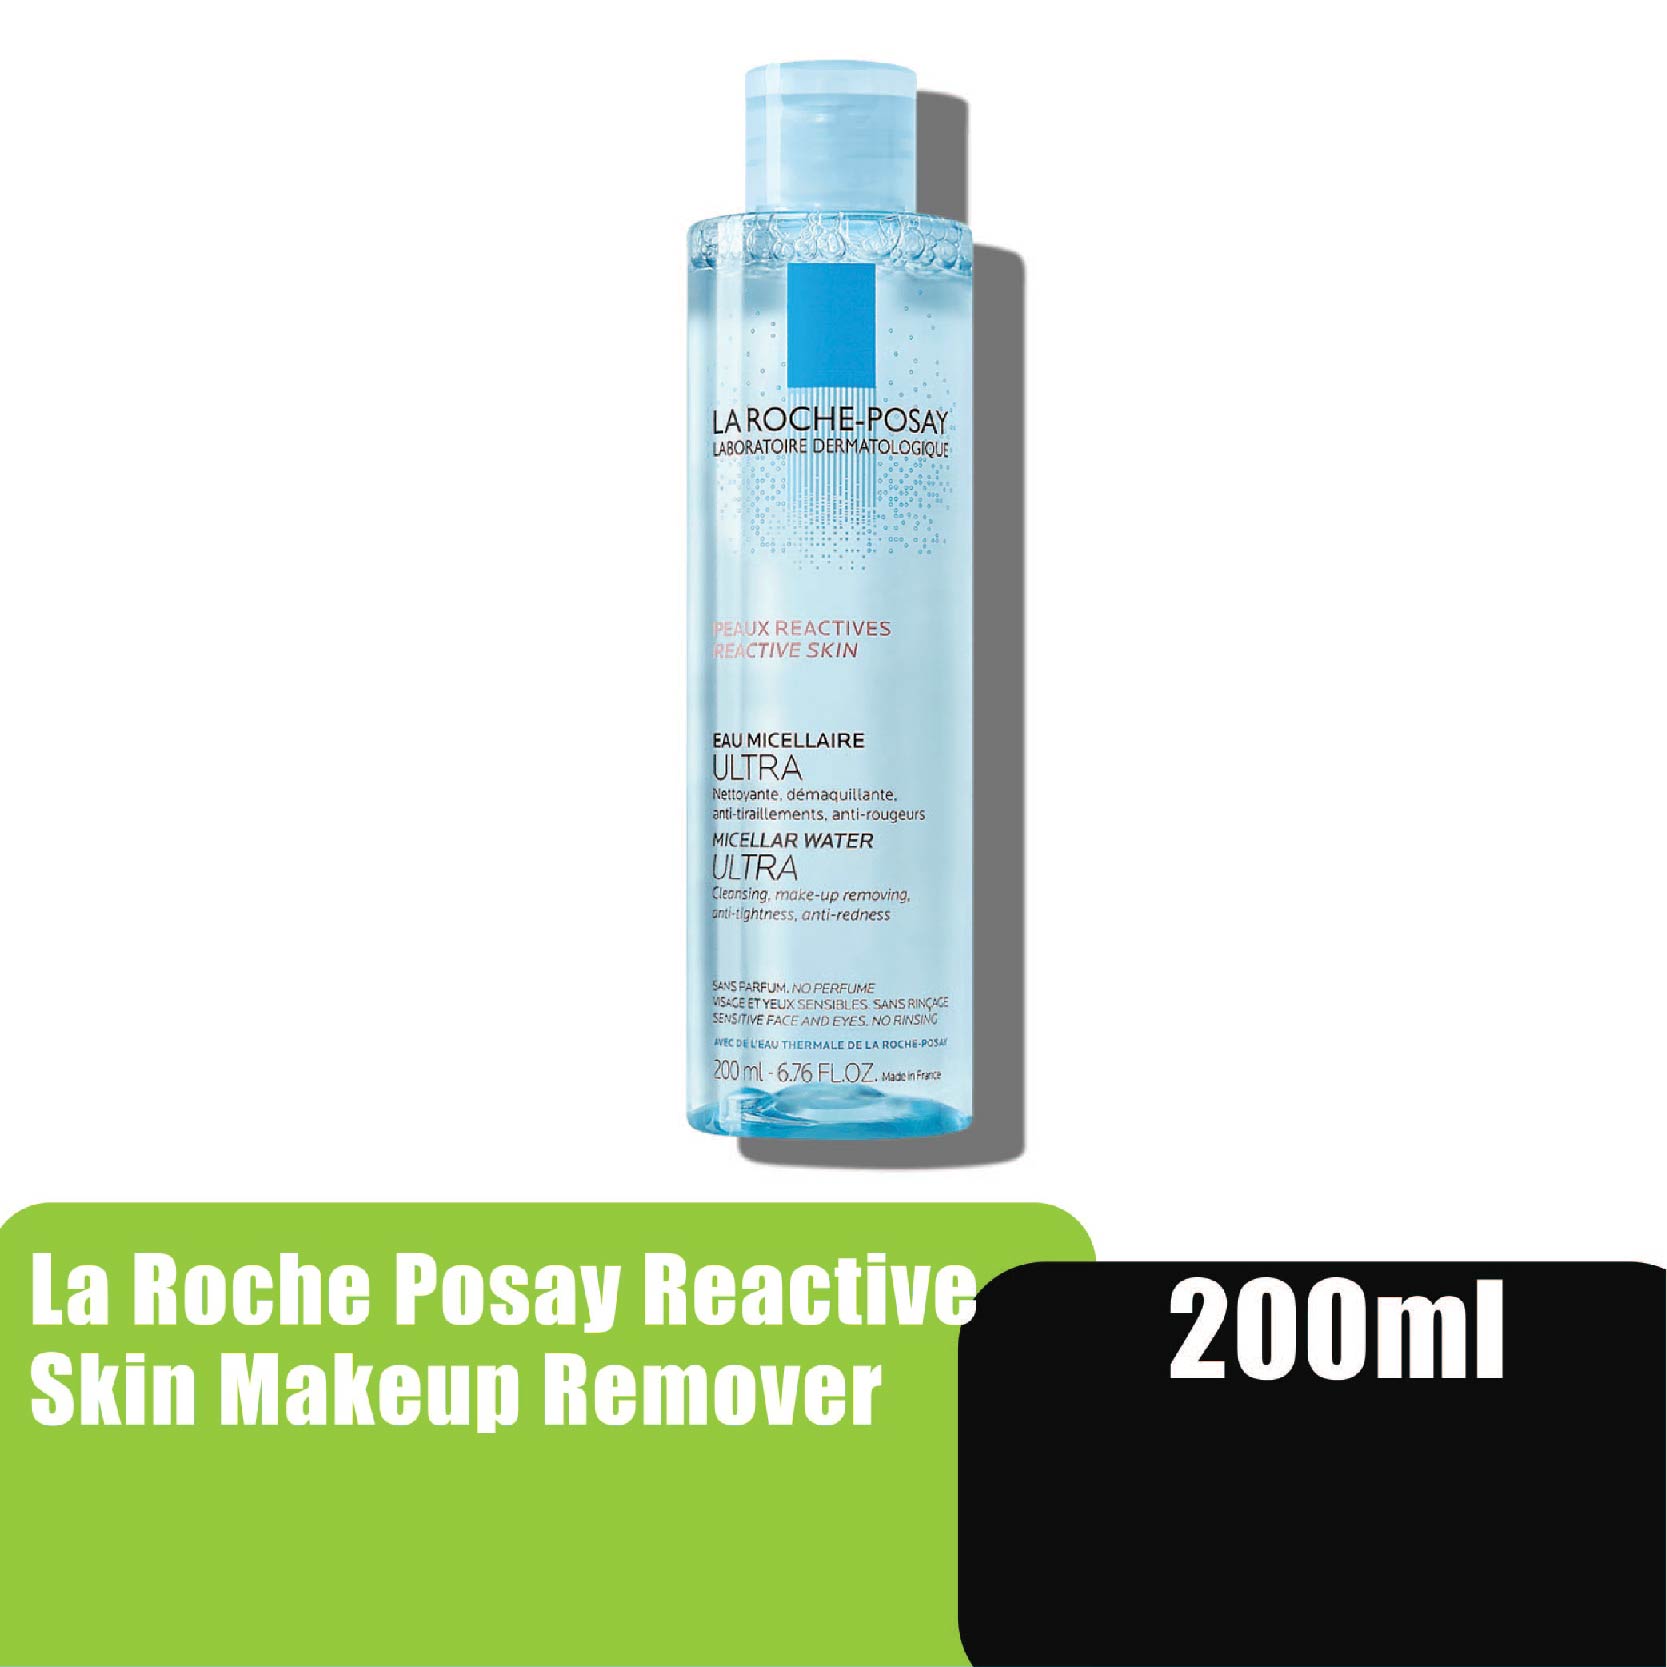 LA ROCHE POSAY Physiological Micellar Water Ultra Reactive Skin Makeup Remover 200ml - Reactive Skin 卸妝水